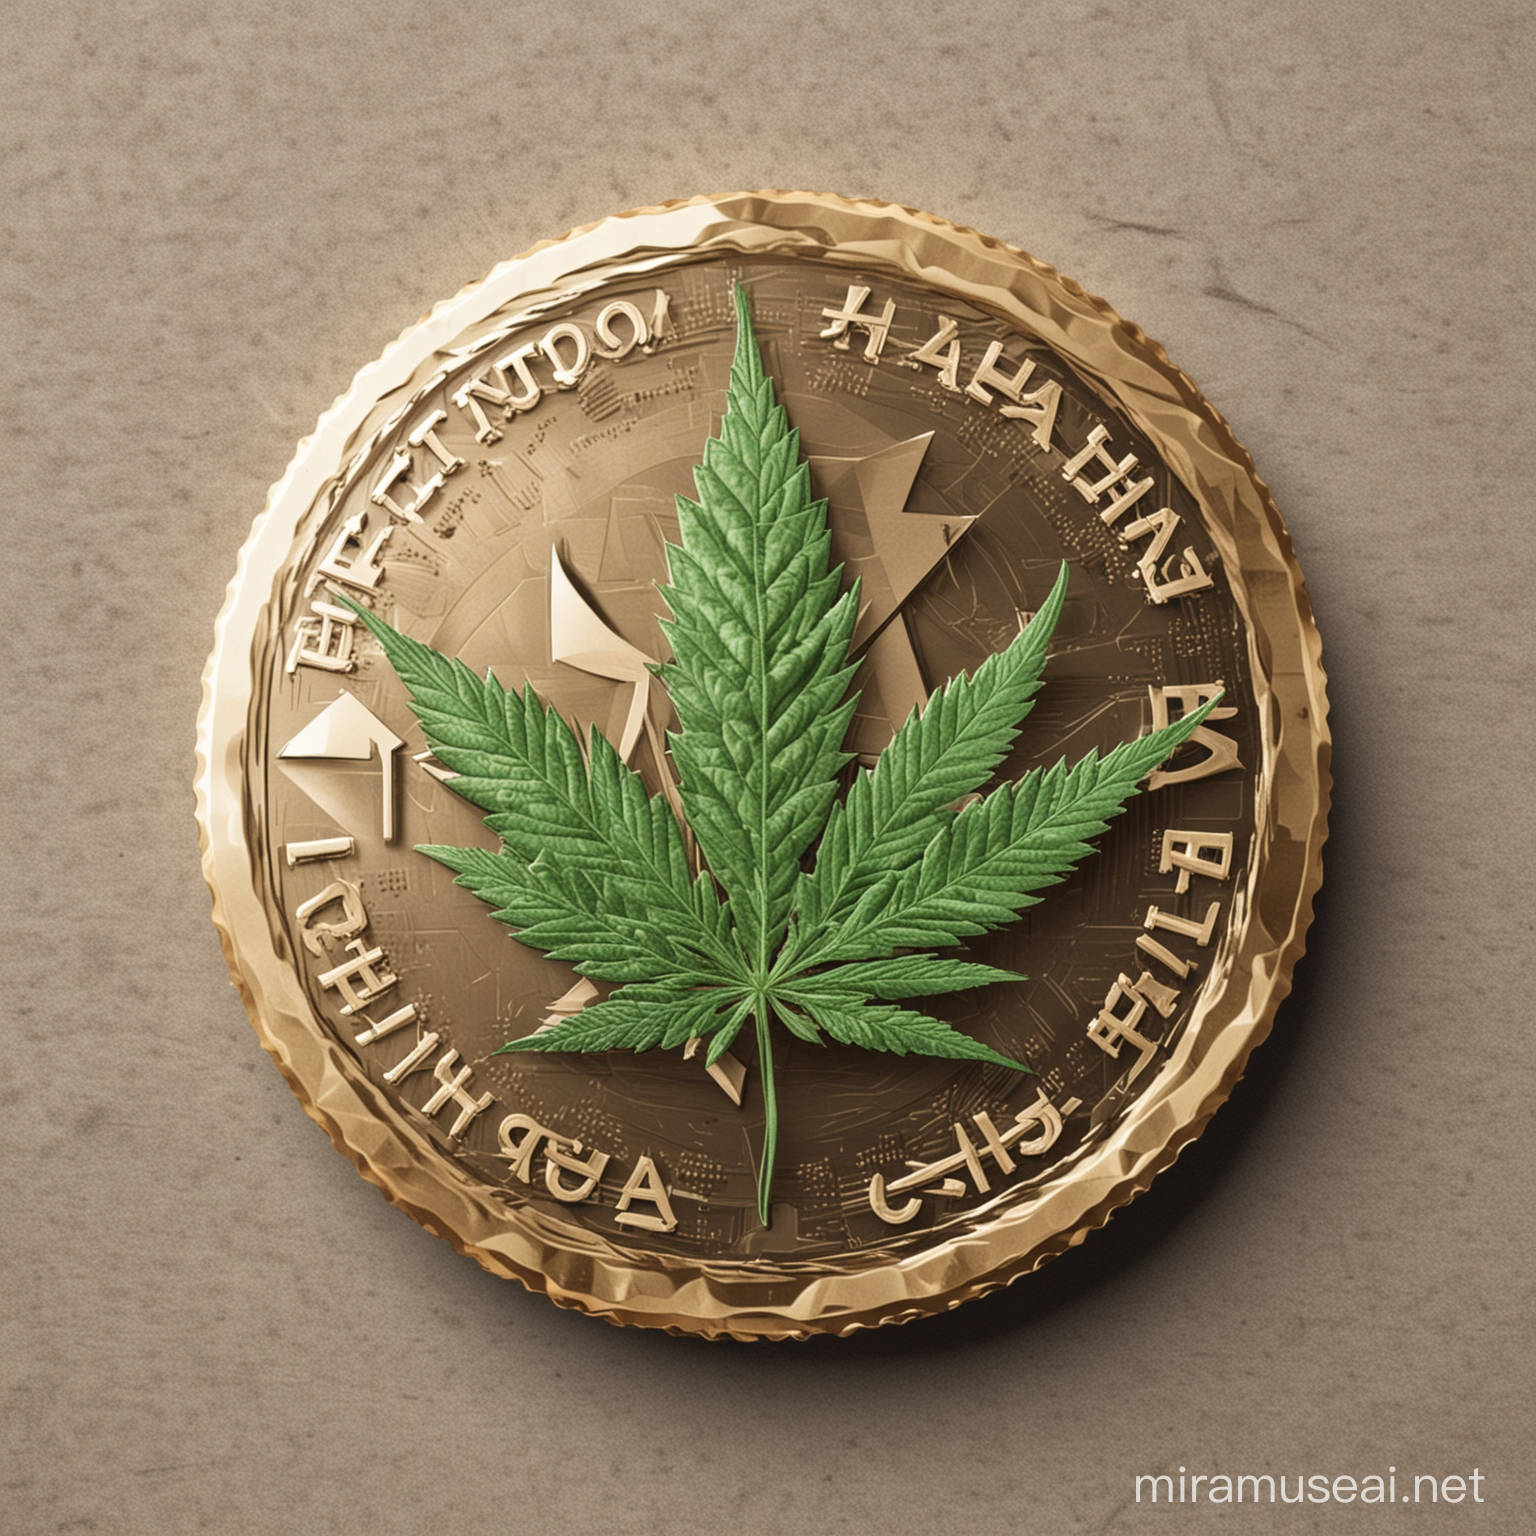 Generate logo for crypto coin named hahahash . Must contain cannabis leaf on coin